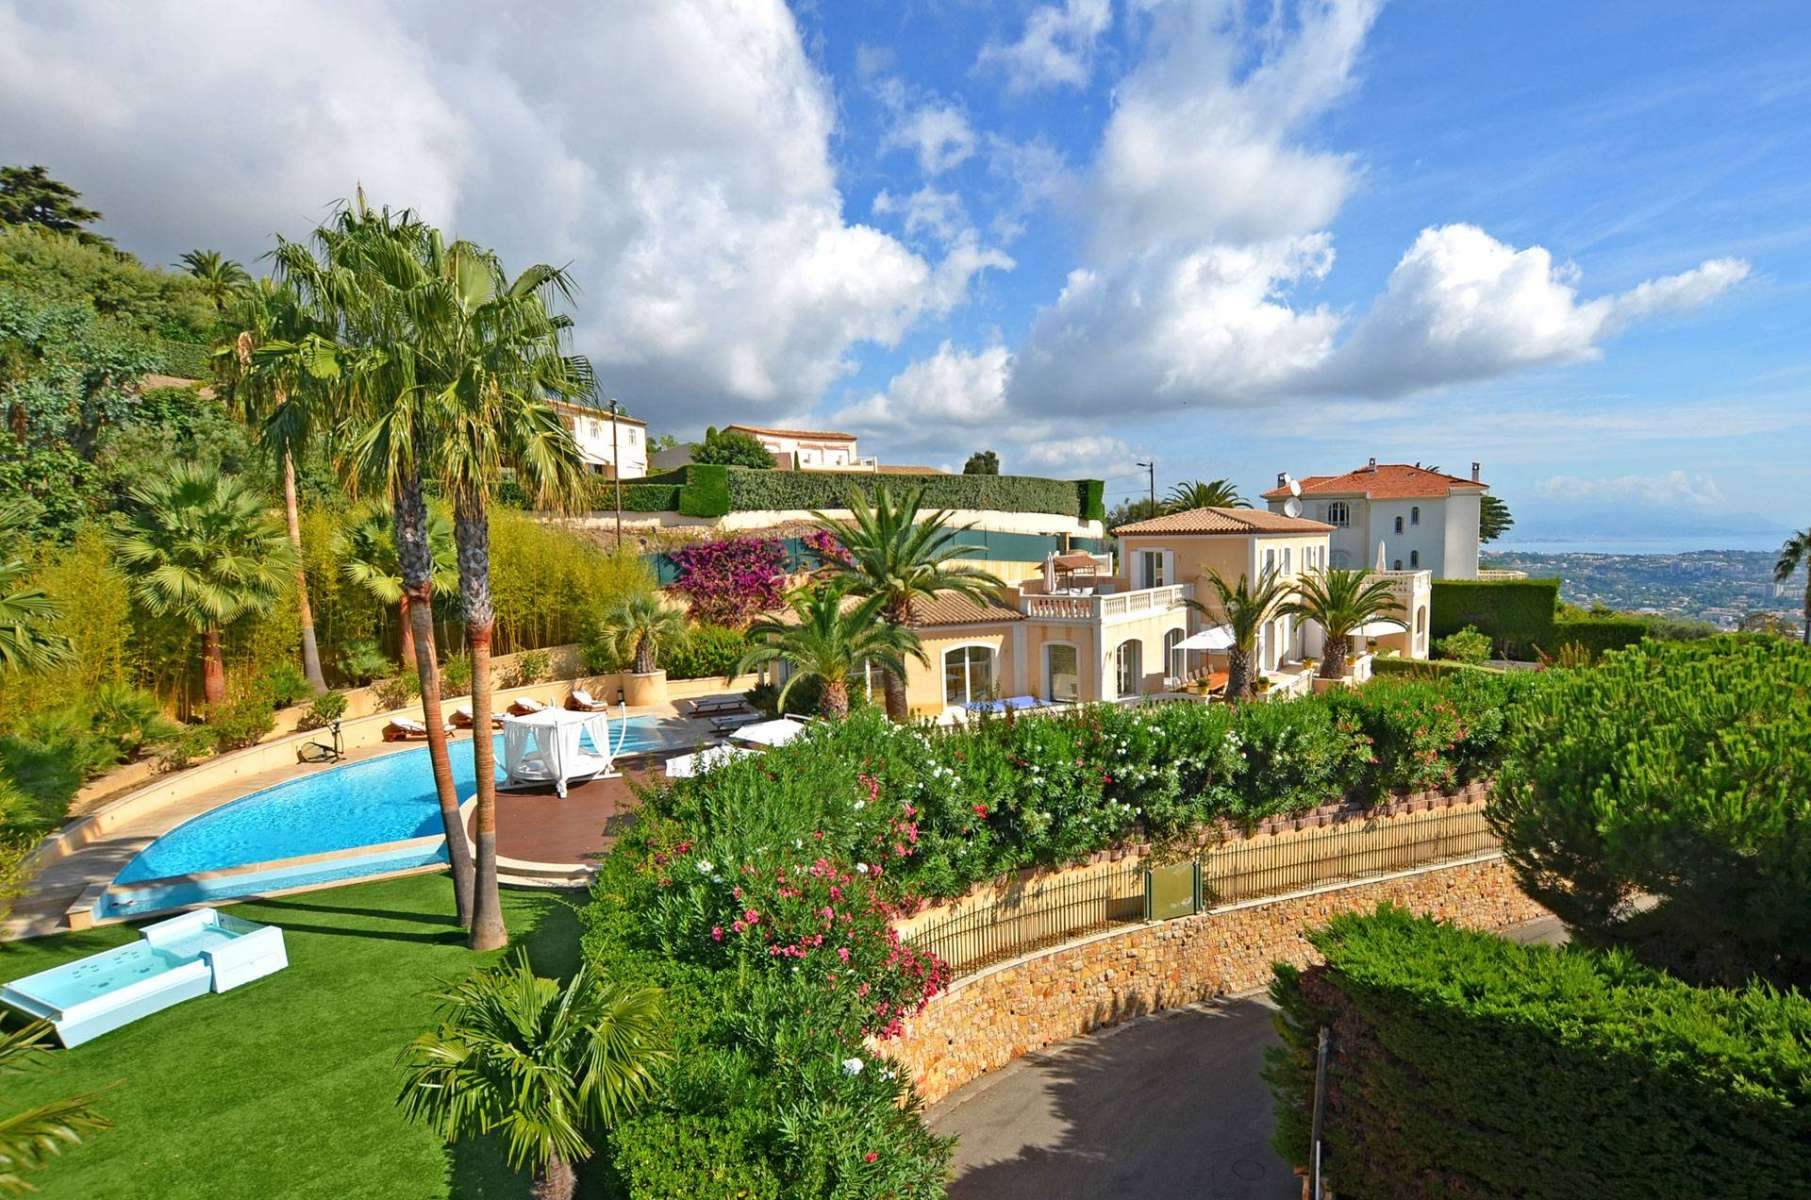 Sea view villa for rent in Cannes